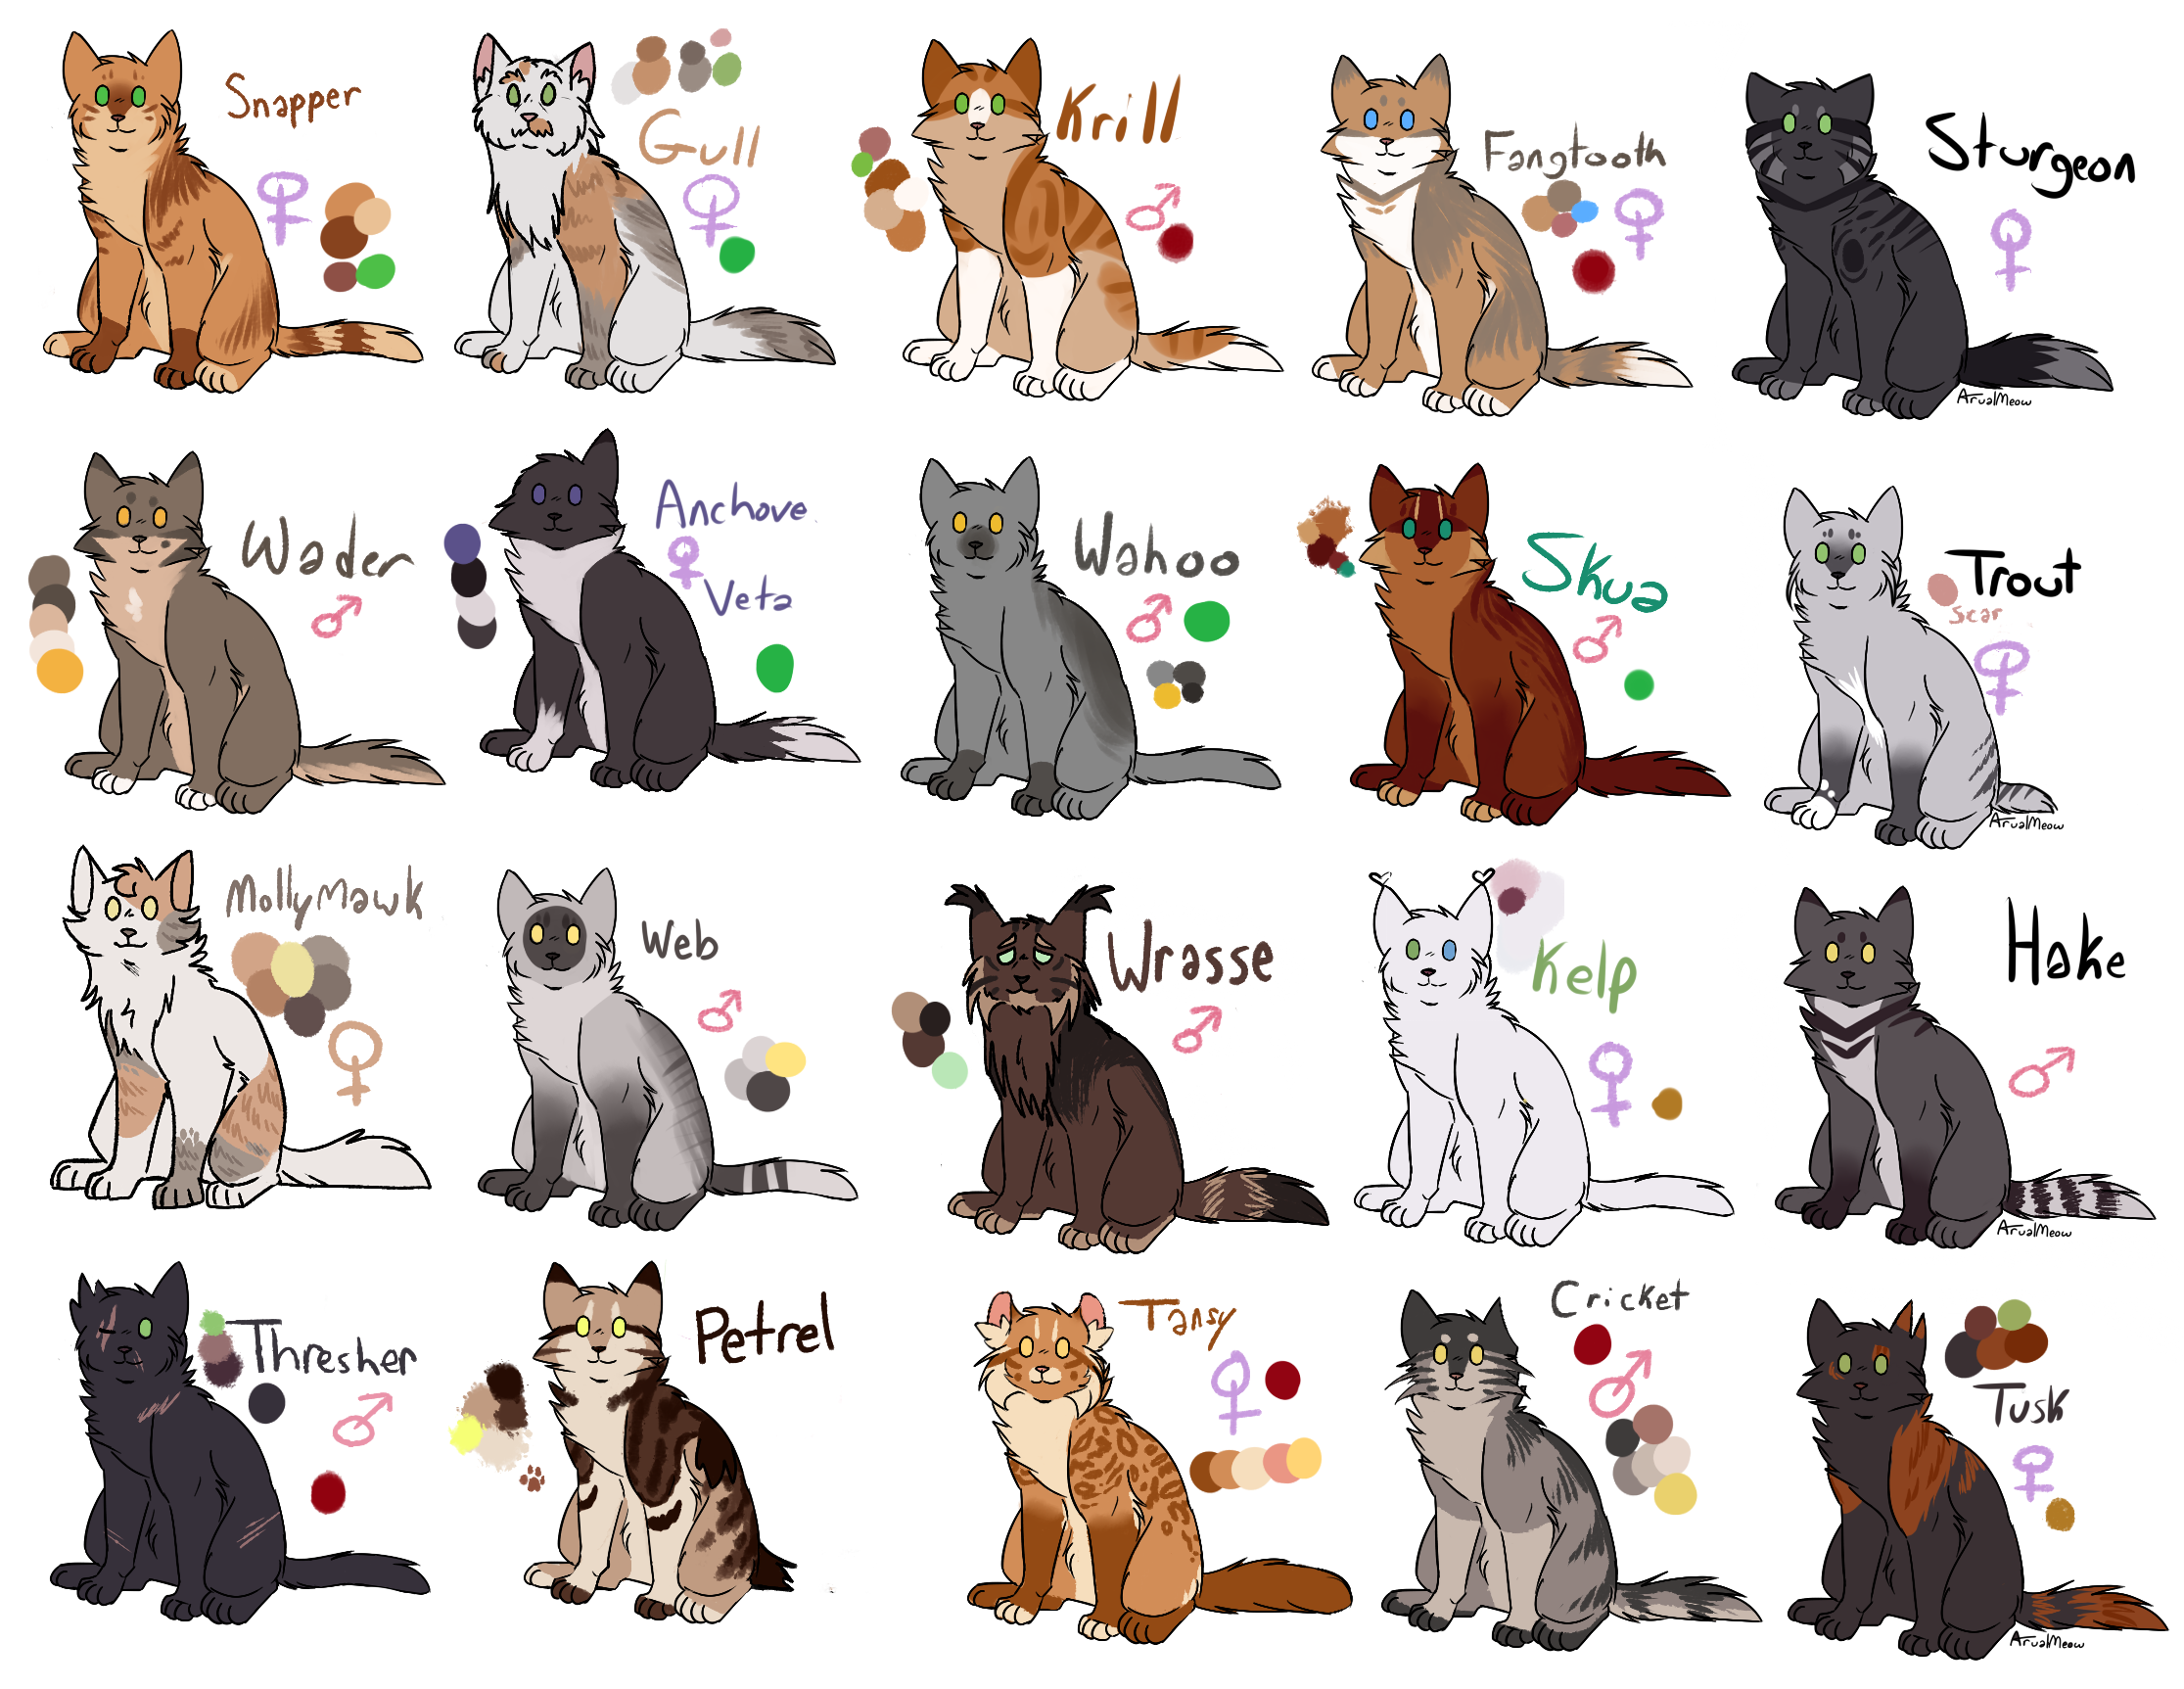 WLB simple refs by ArualMeow on DeviantArt